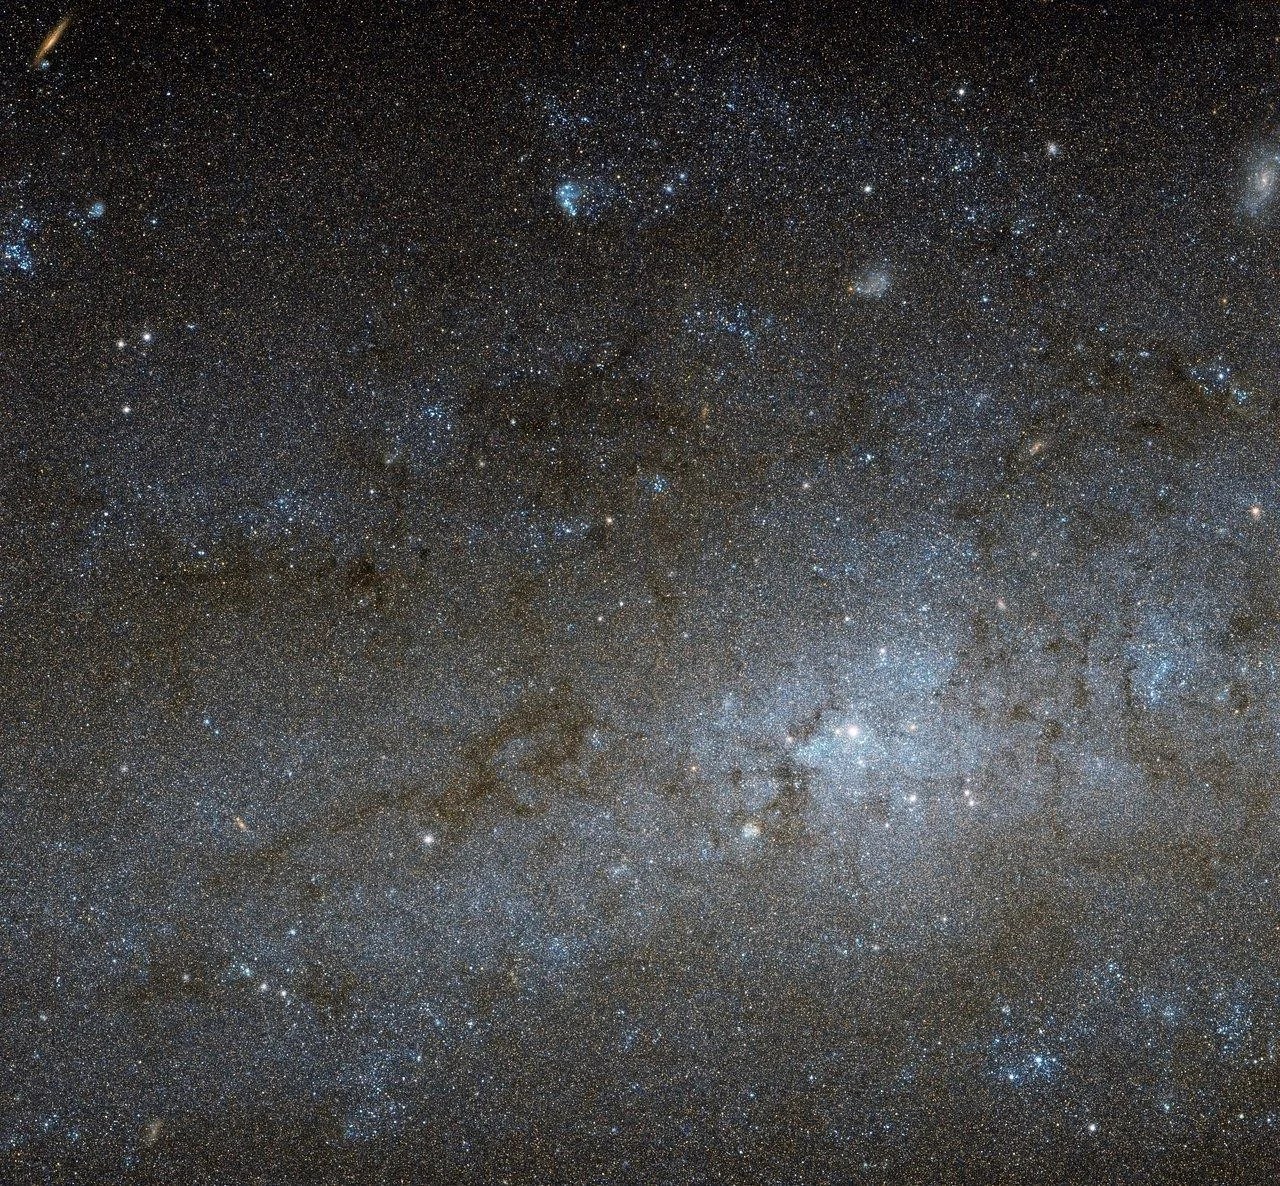 The galaxy's nucleus is visible here as a bright, whitish patch, surrounded by a mixture of bluish-white stars and blackish clouds of gas and dust.